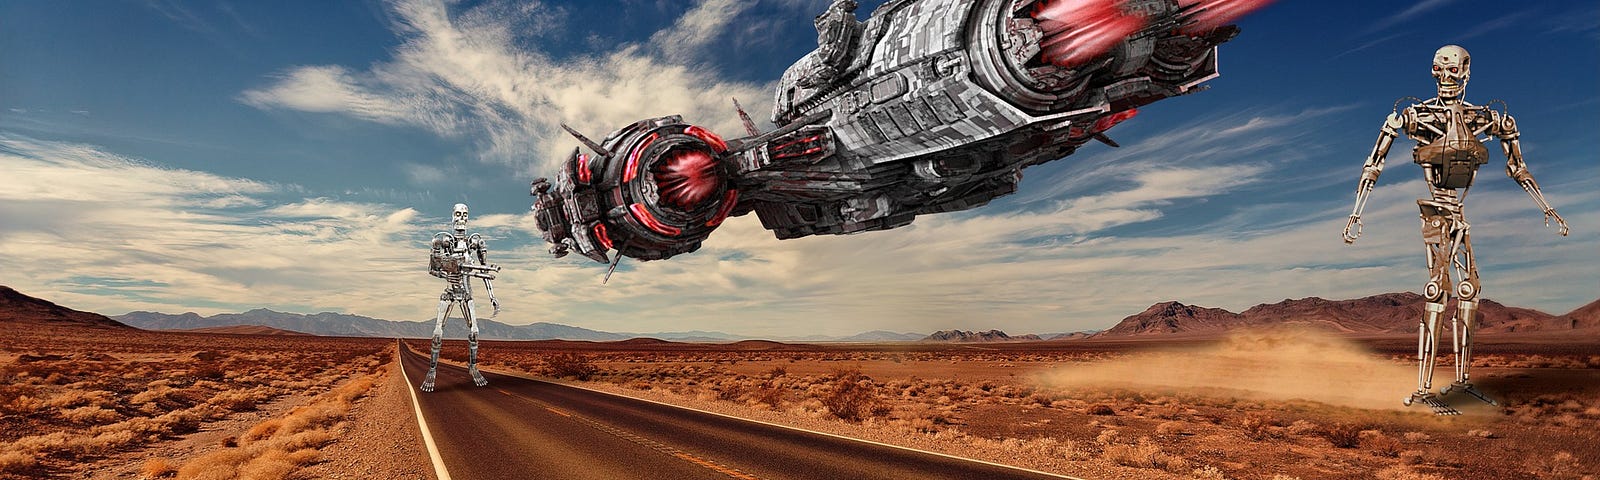 image of an alien ship hovering over a prairie road with two large robots walking nearby